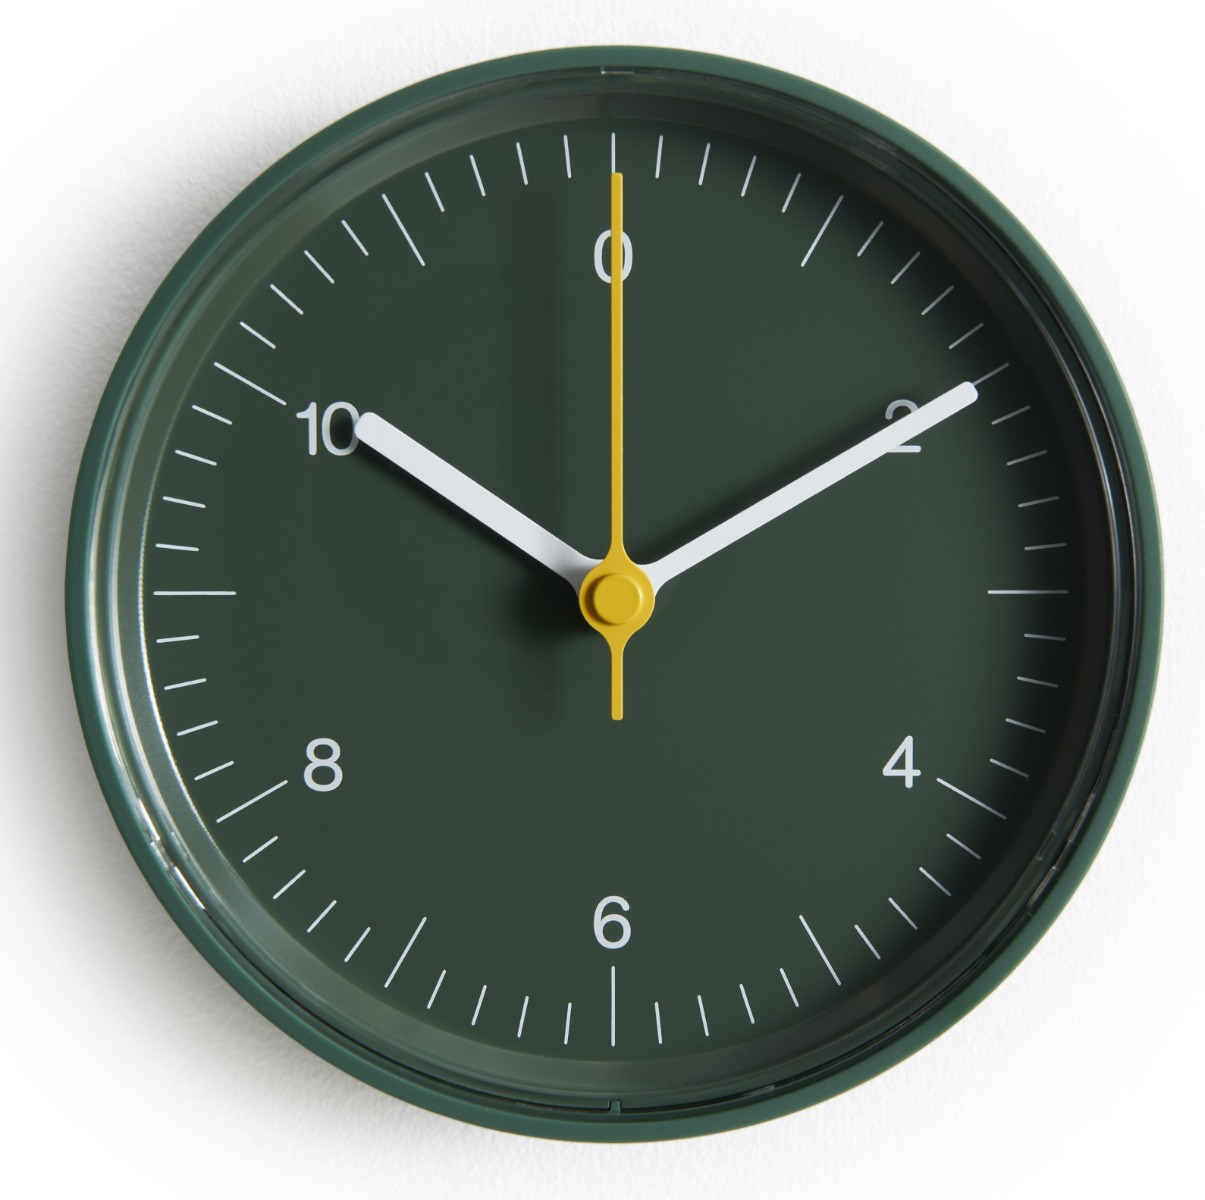 https://www.fundesign.nl/media/catalog/product/a/b/ab311-a587_table_clock_green_detail.jpg